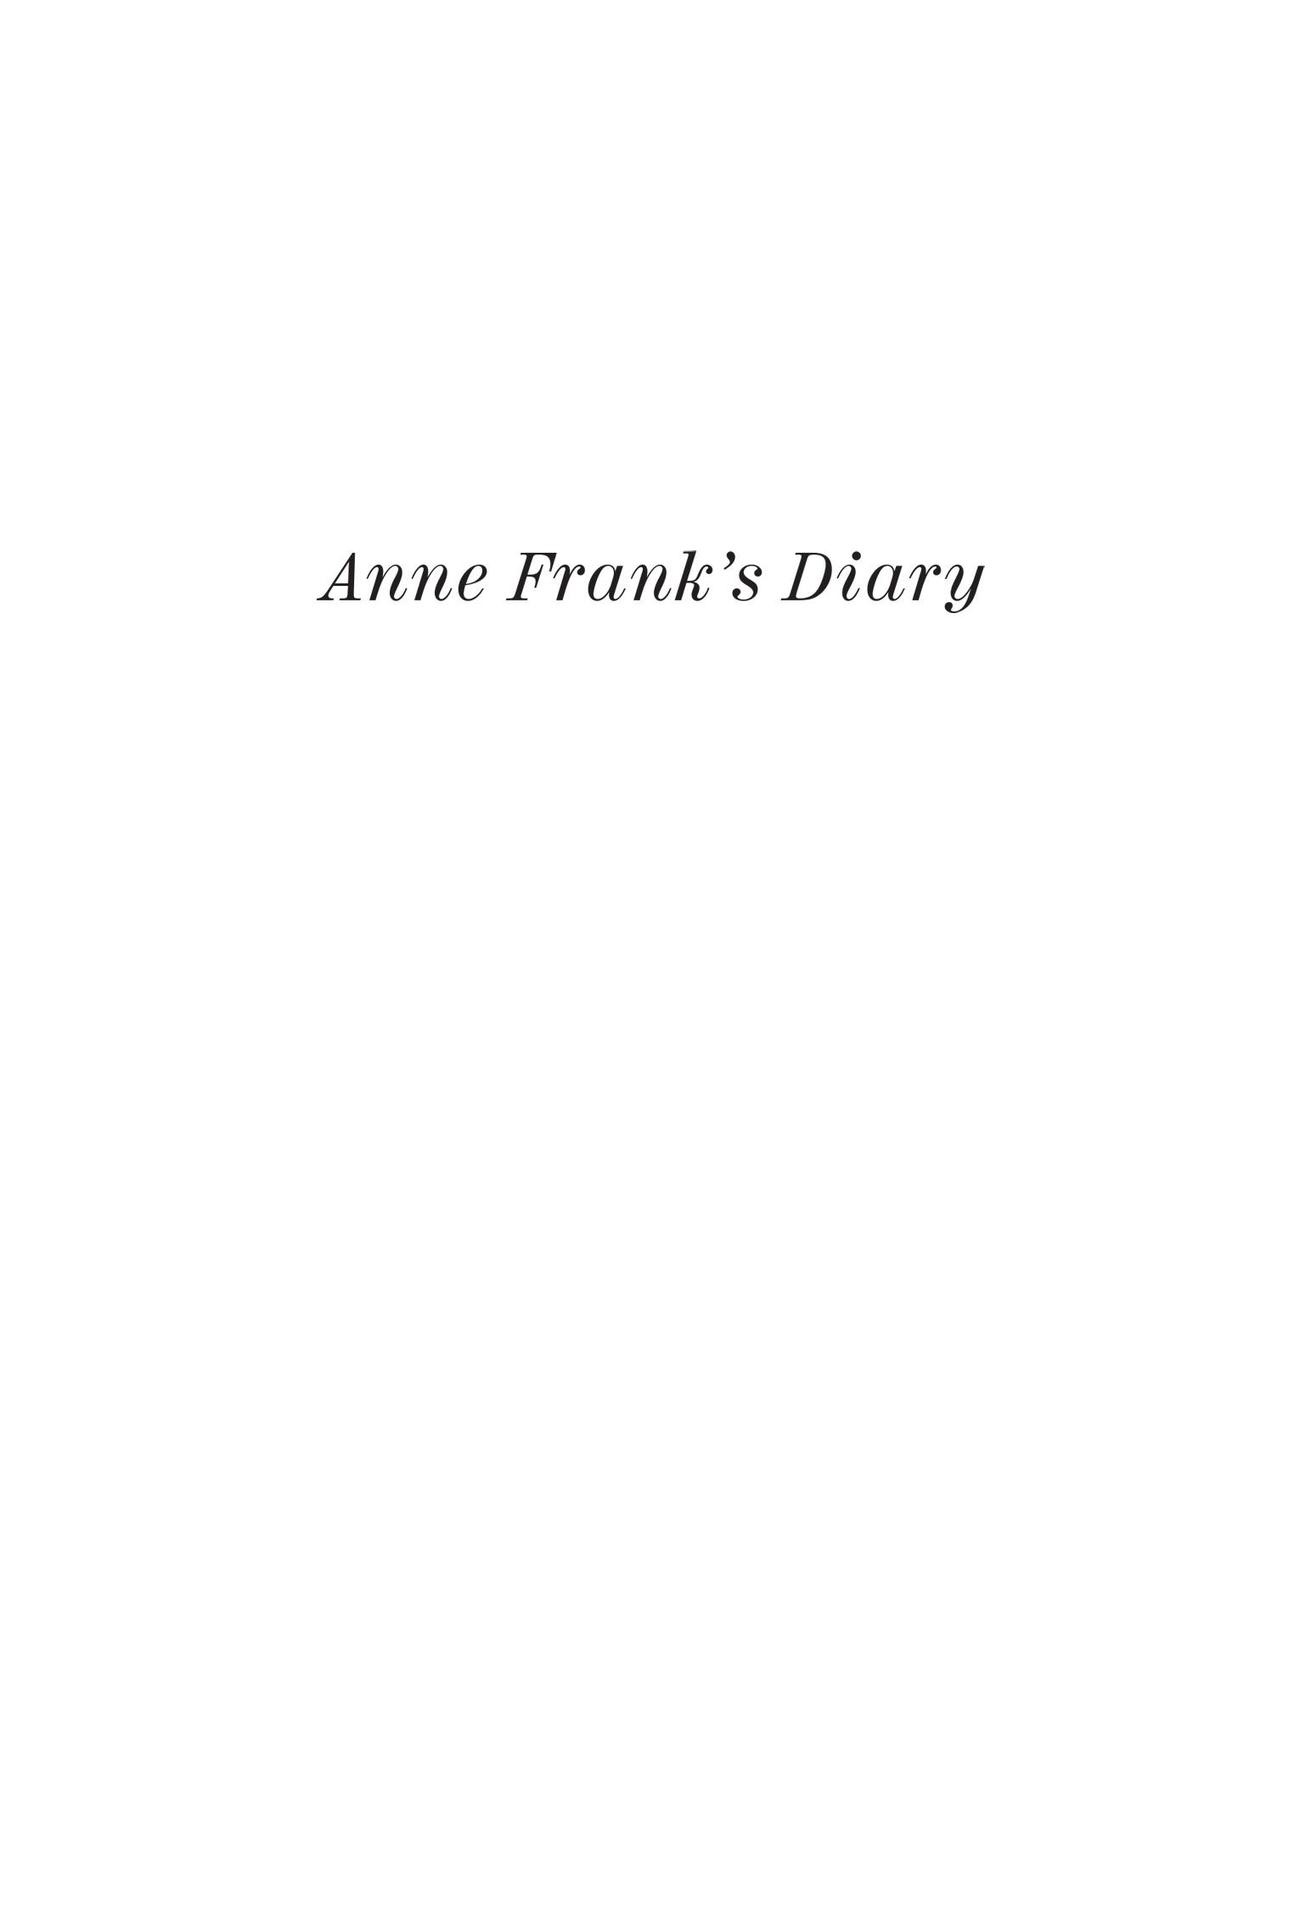 Read online Anne Frank’s Diary: The Graphic Adaptation comic -  Issue # TPB - 2